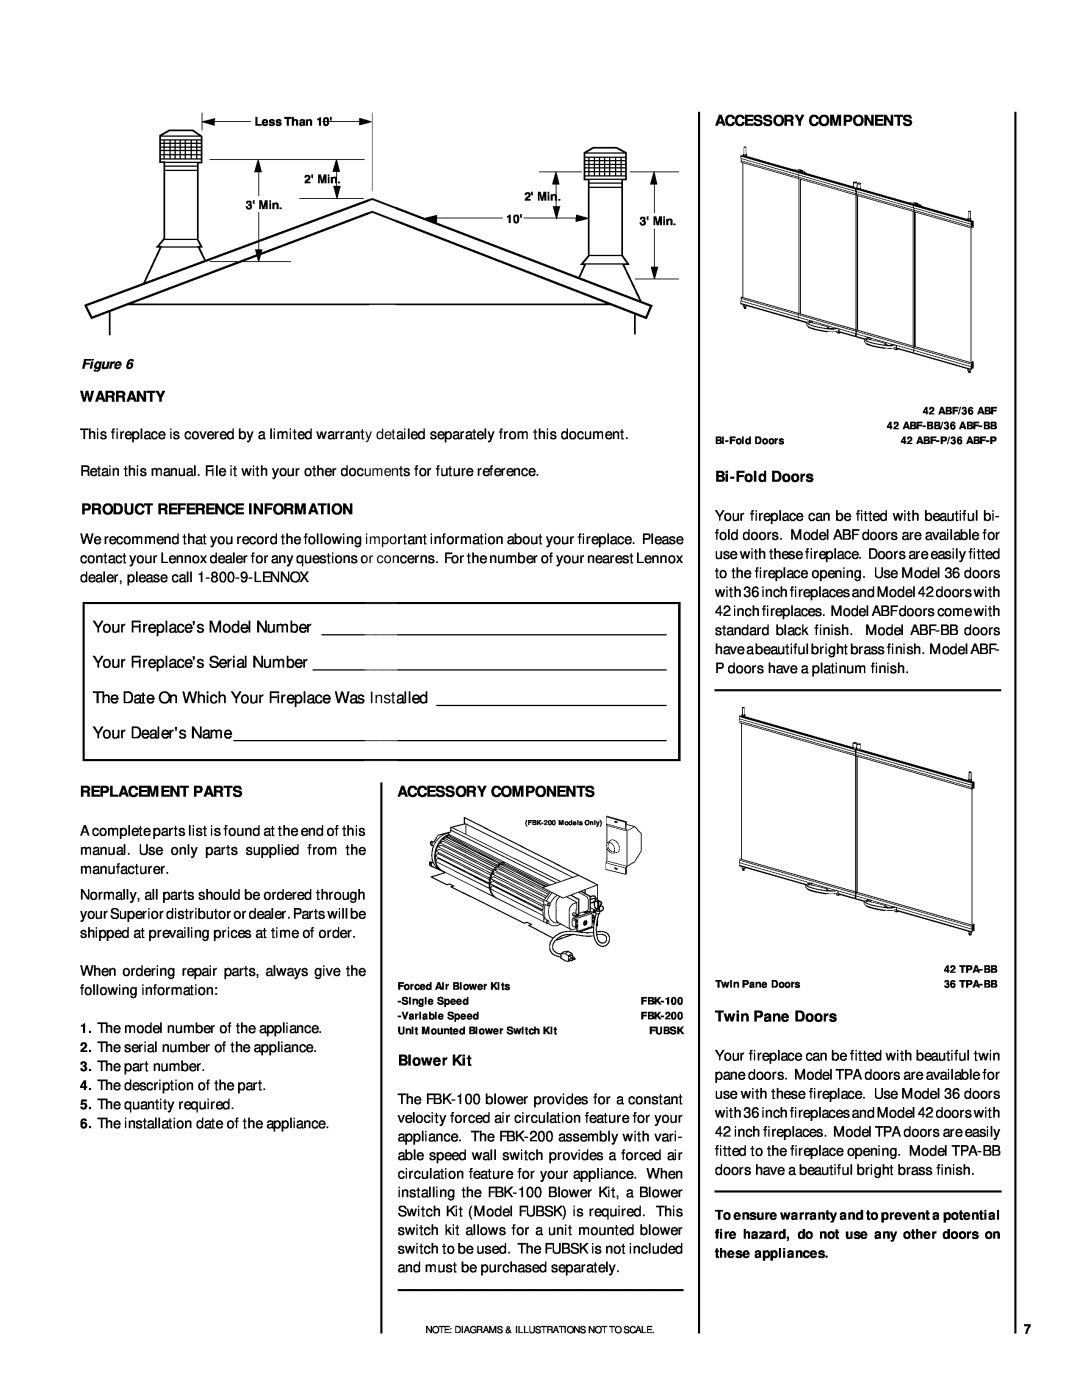 Lennox Hearth BC-36/42 Accessory Components, Warranty, Product Reference Information, Bi-FoldDoors, Replacement Parts 